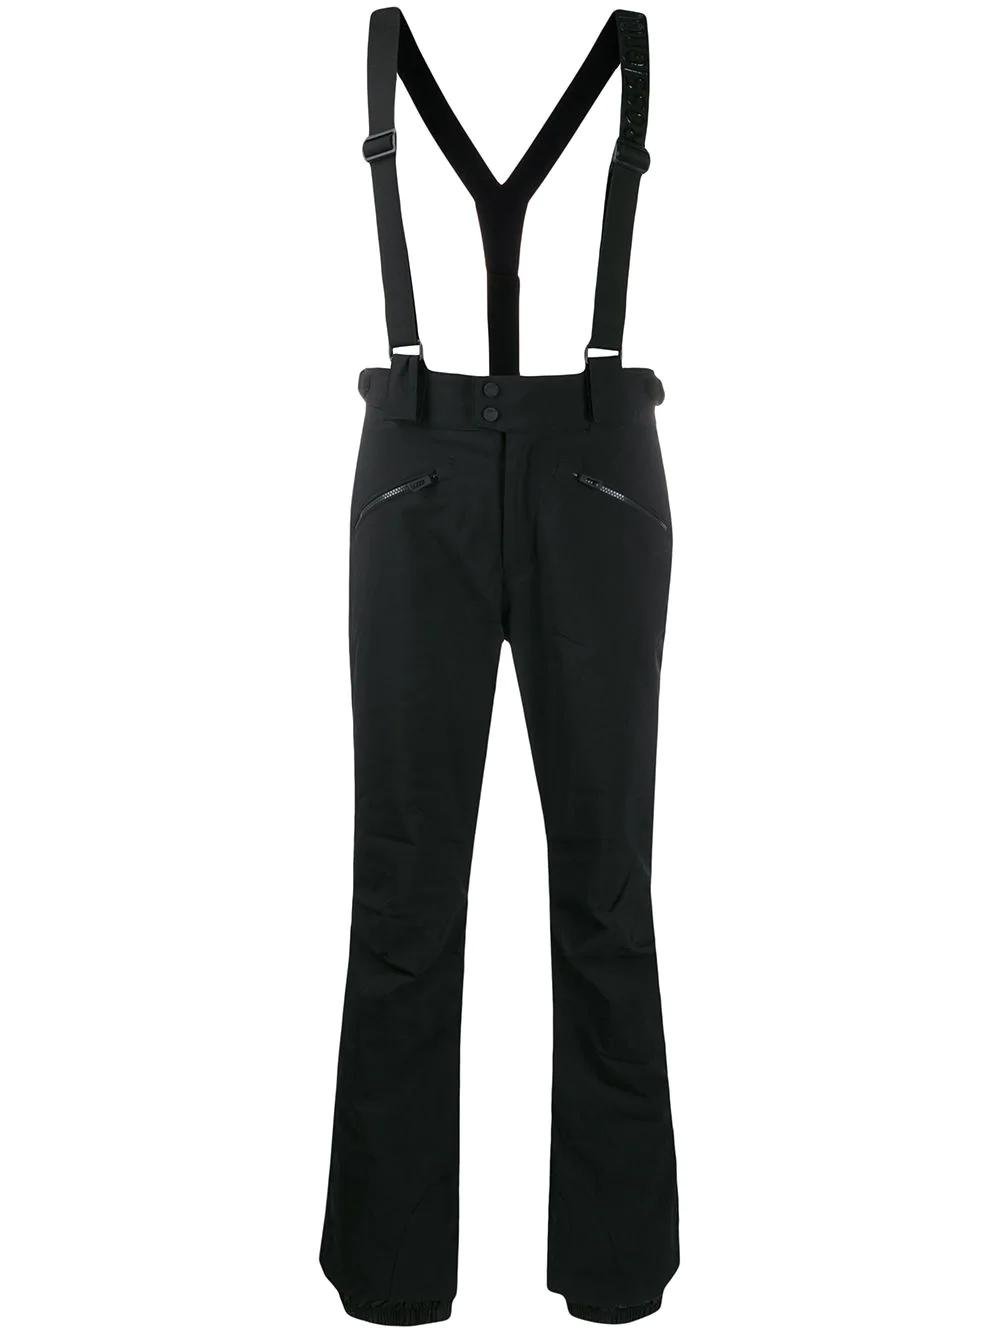 Classique ski trousers by ROSSIGNOL